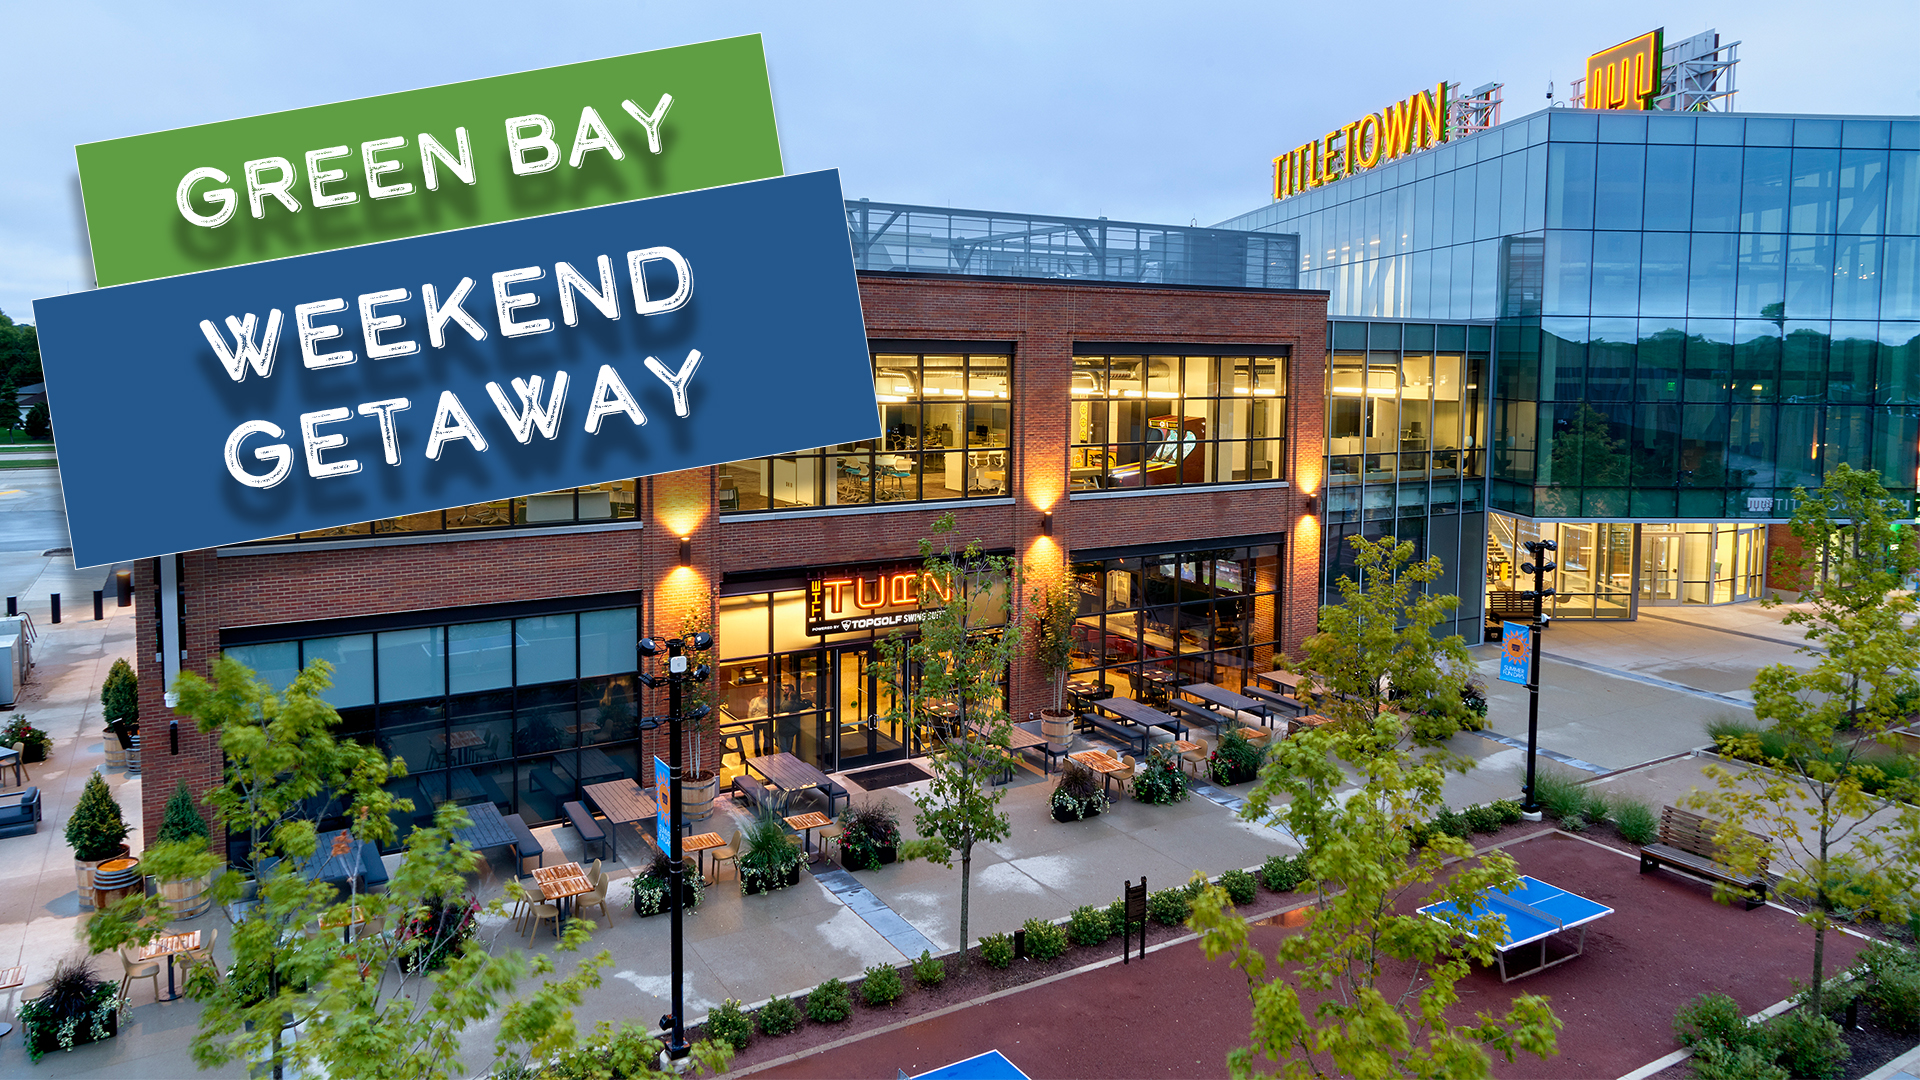 Enter for Your Chance to Win a Weekend Getaway to Green Bay!